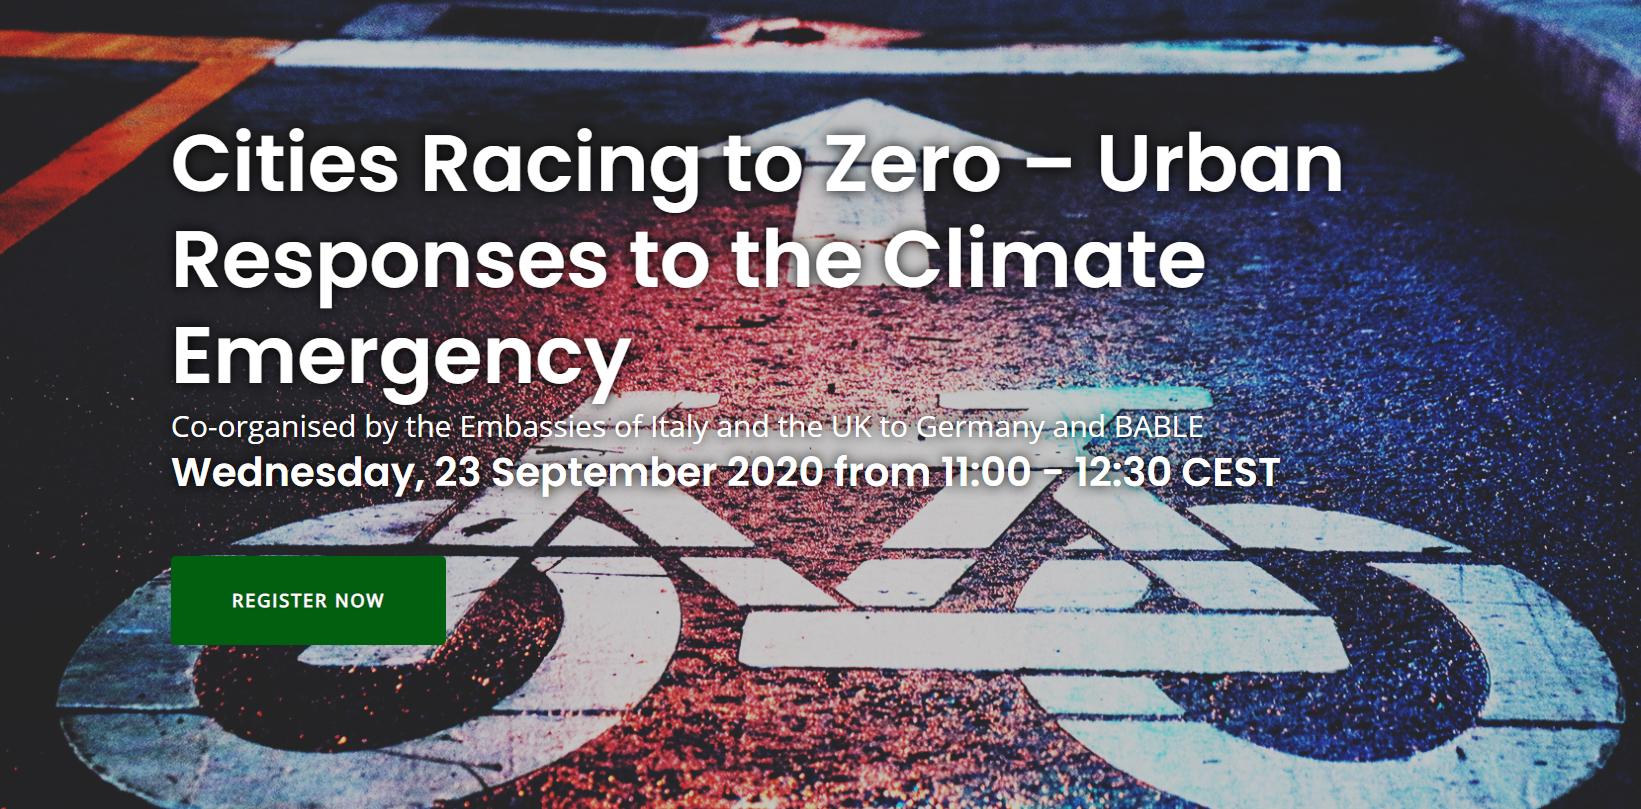 Cities Racing to Zero – Urban Responses to the Climate Emergency